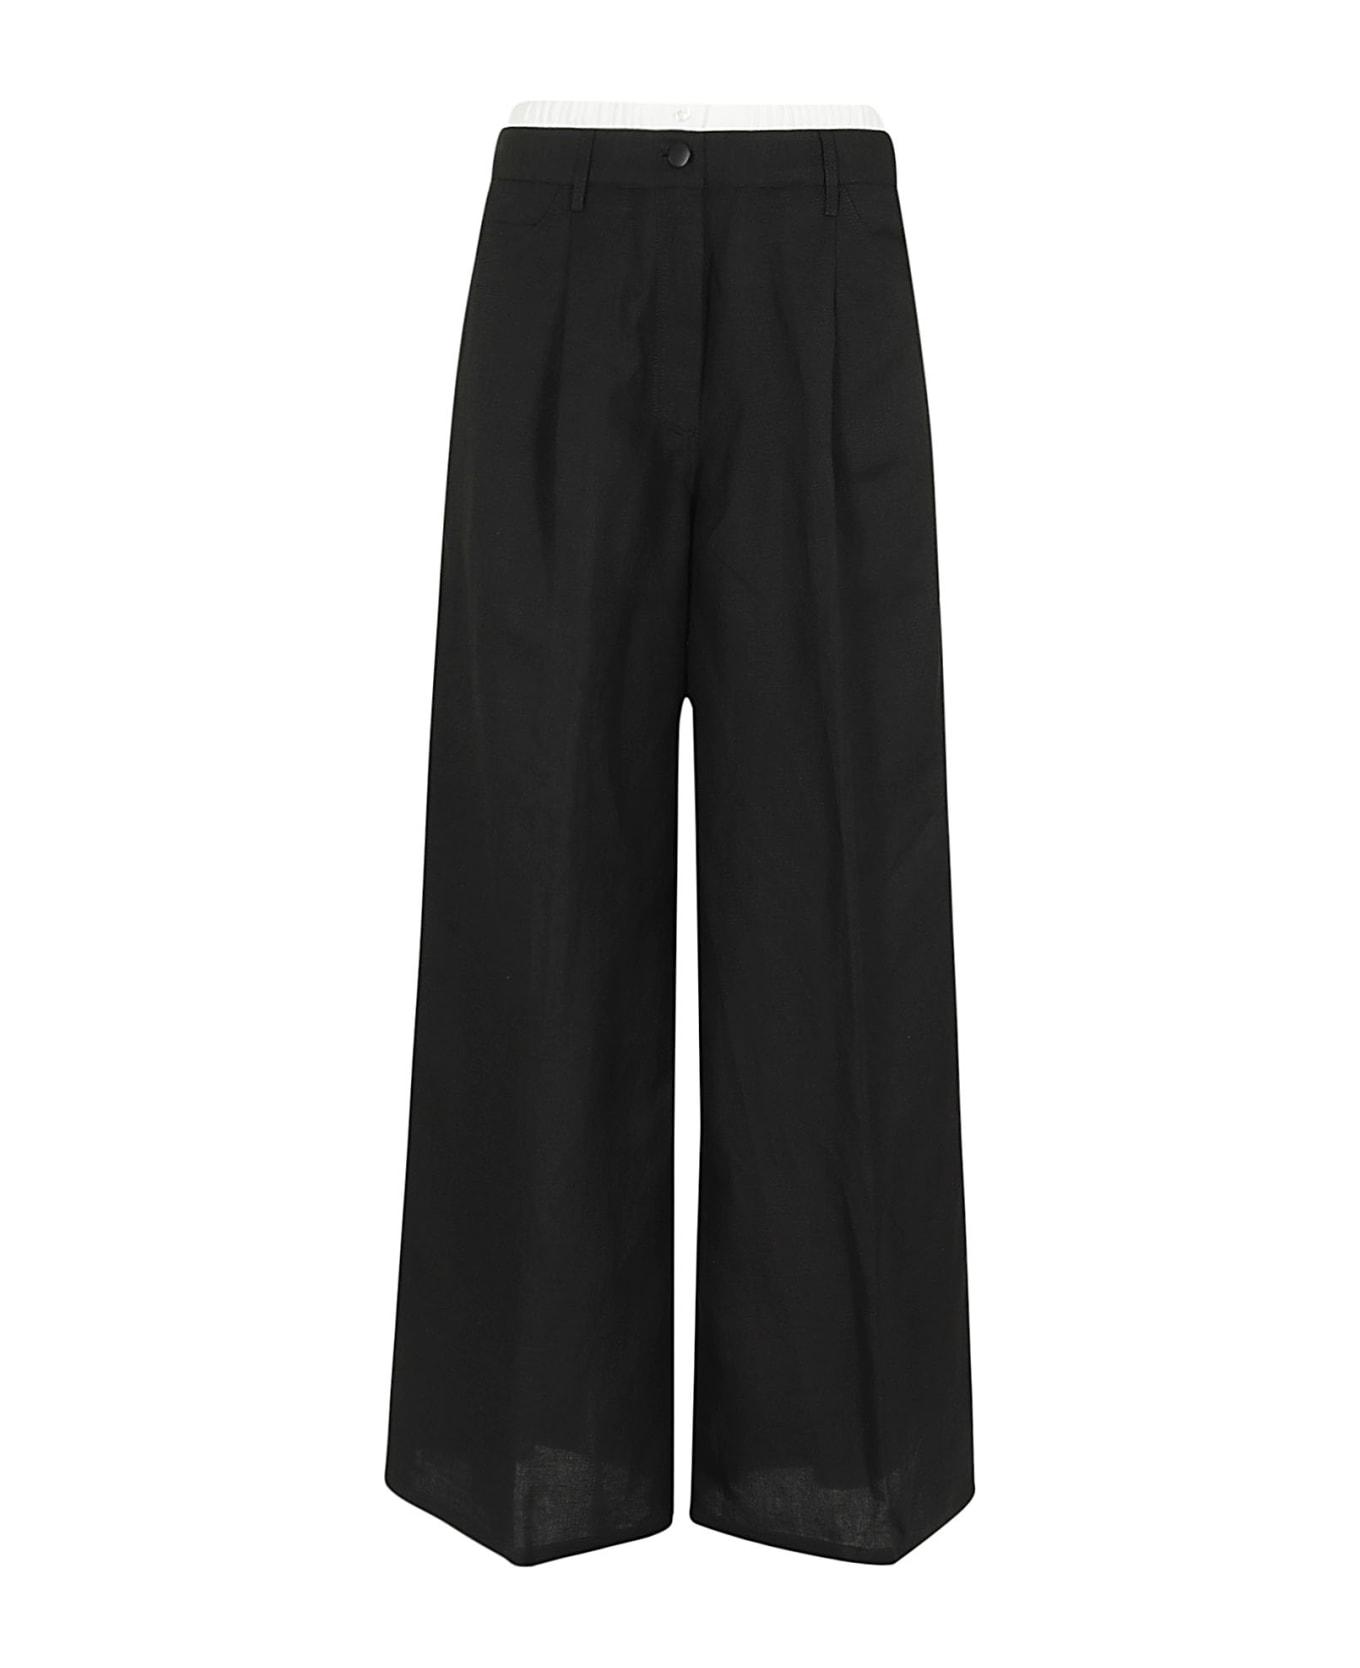 REMAIN Birger Christensen Wide Suiting Pants - Black  ボトムス